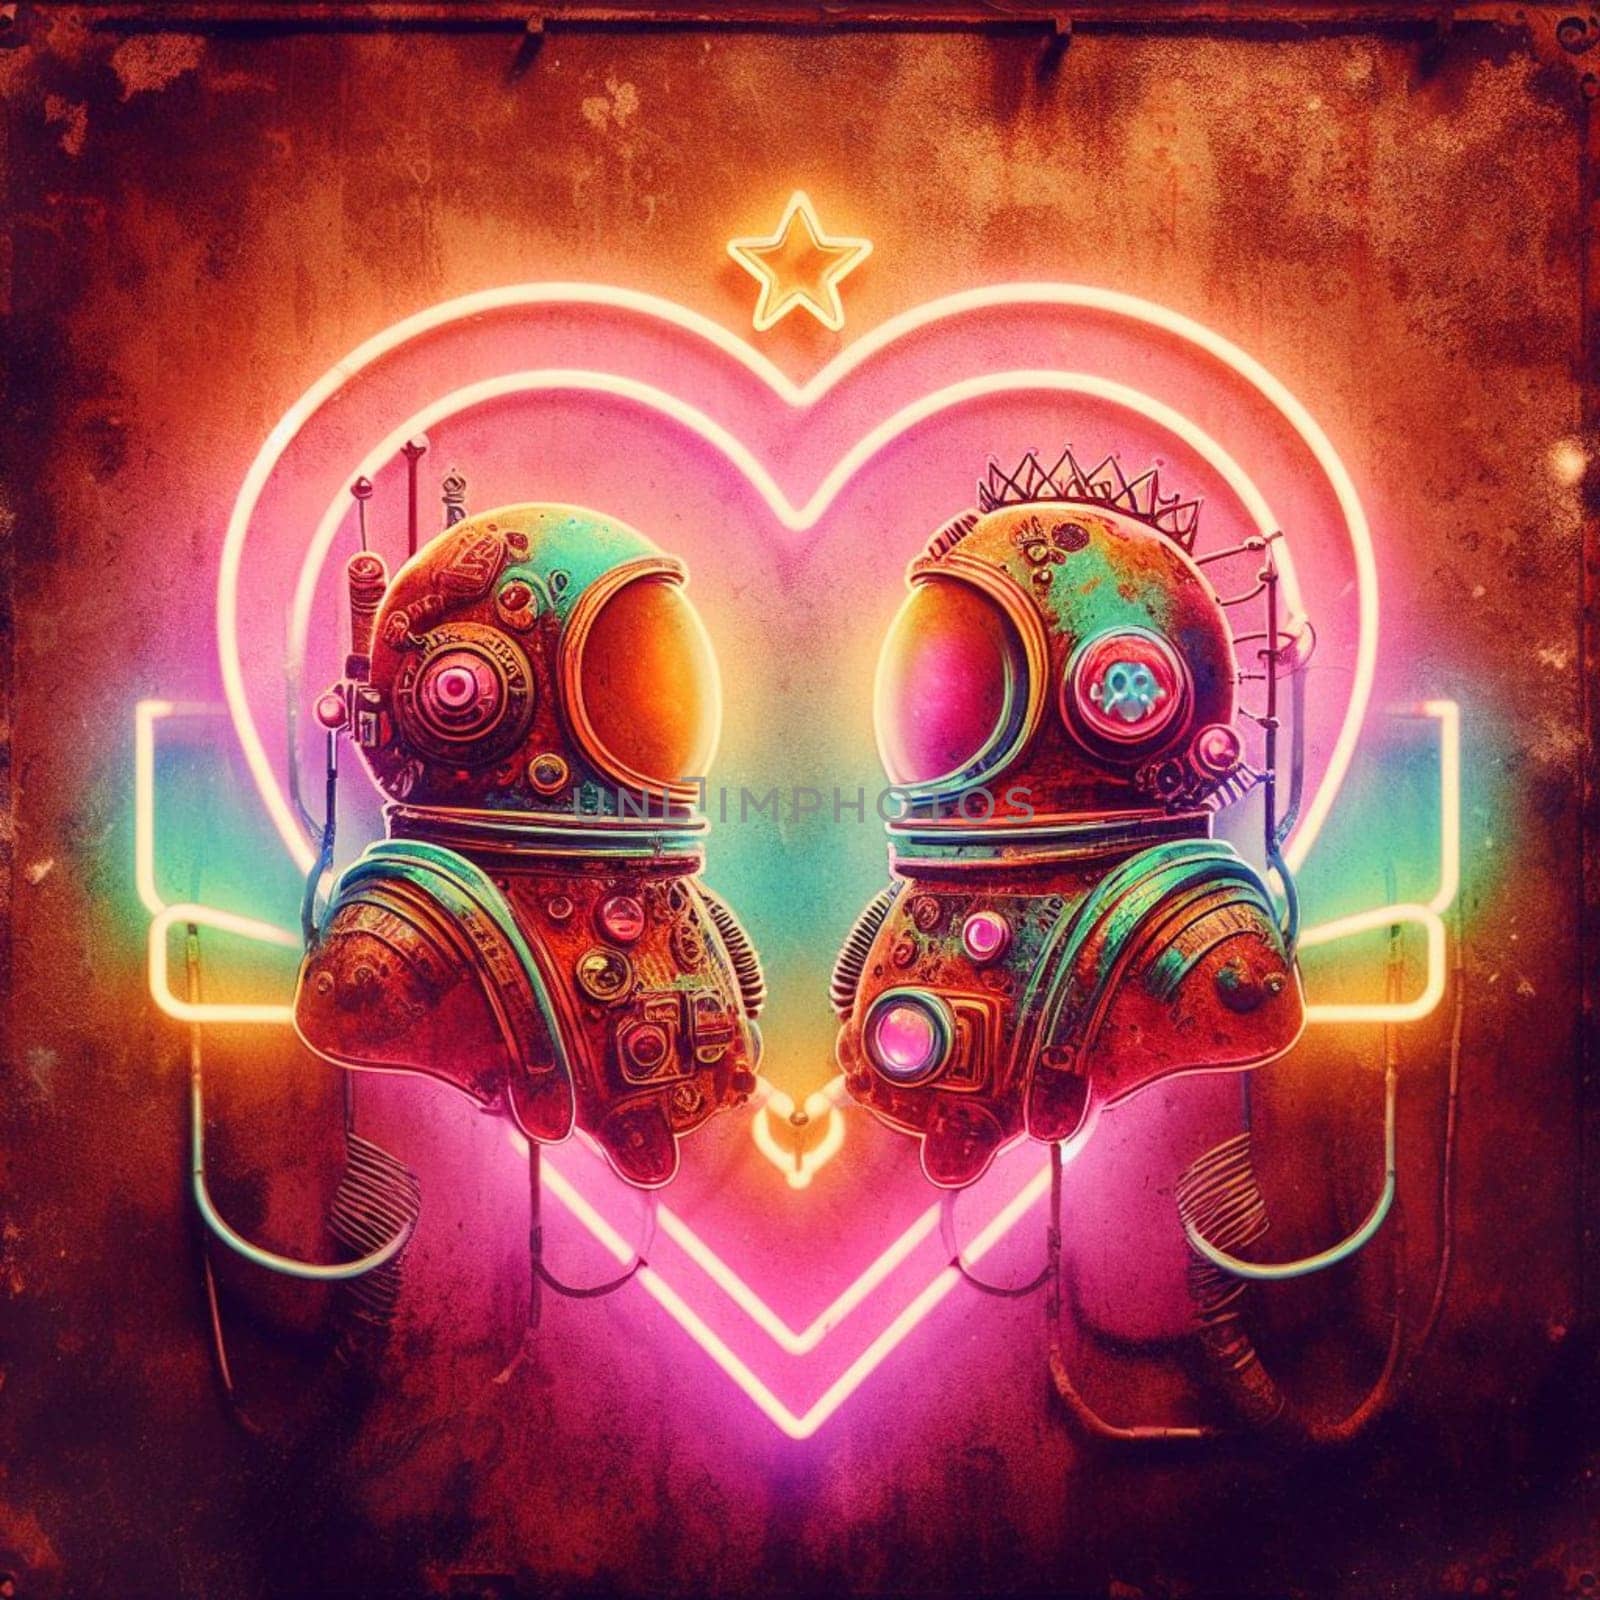 steampunk astronaut king and queen in love neon sign valentine illustration concept rusty background by verbano